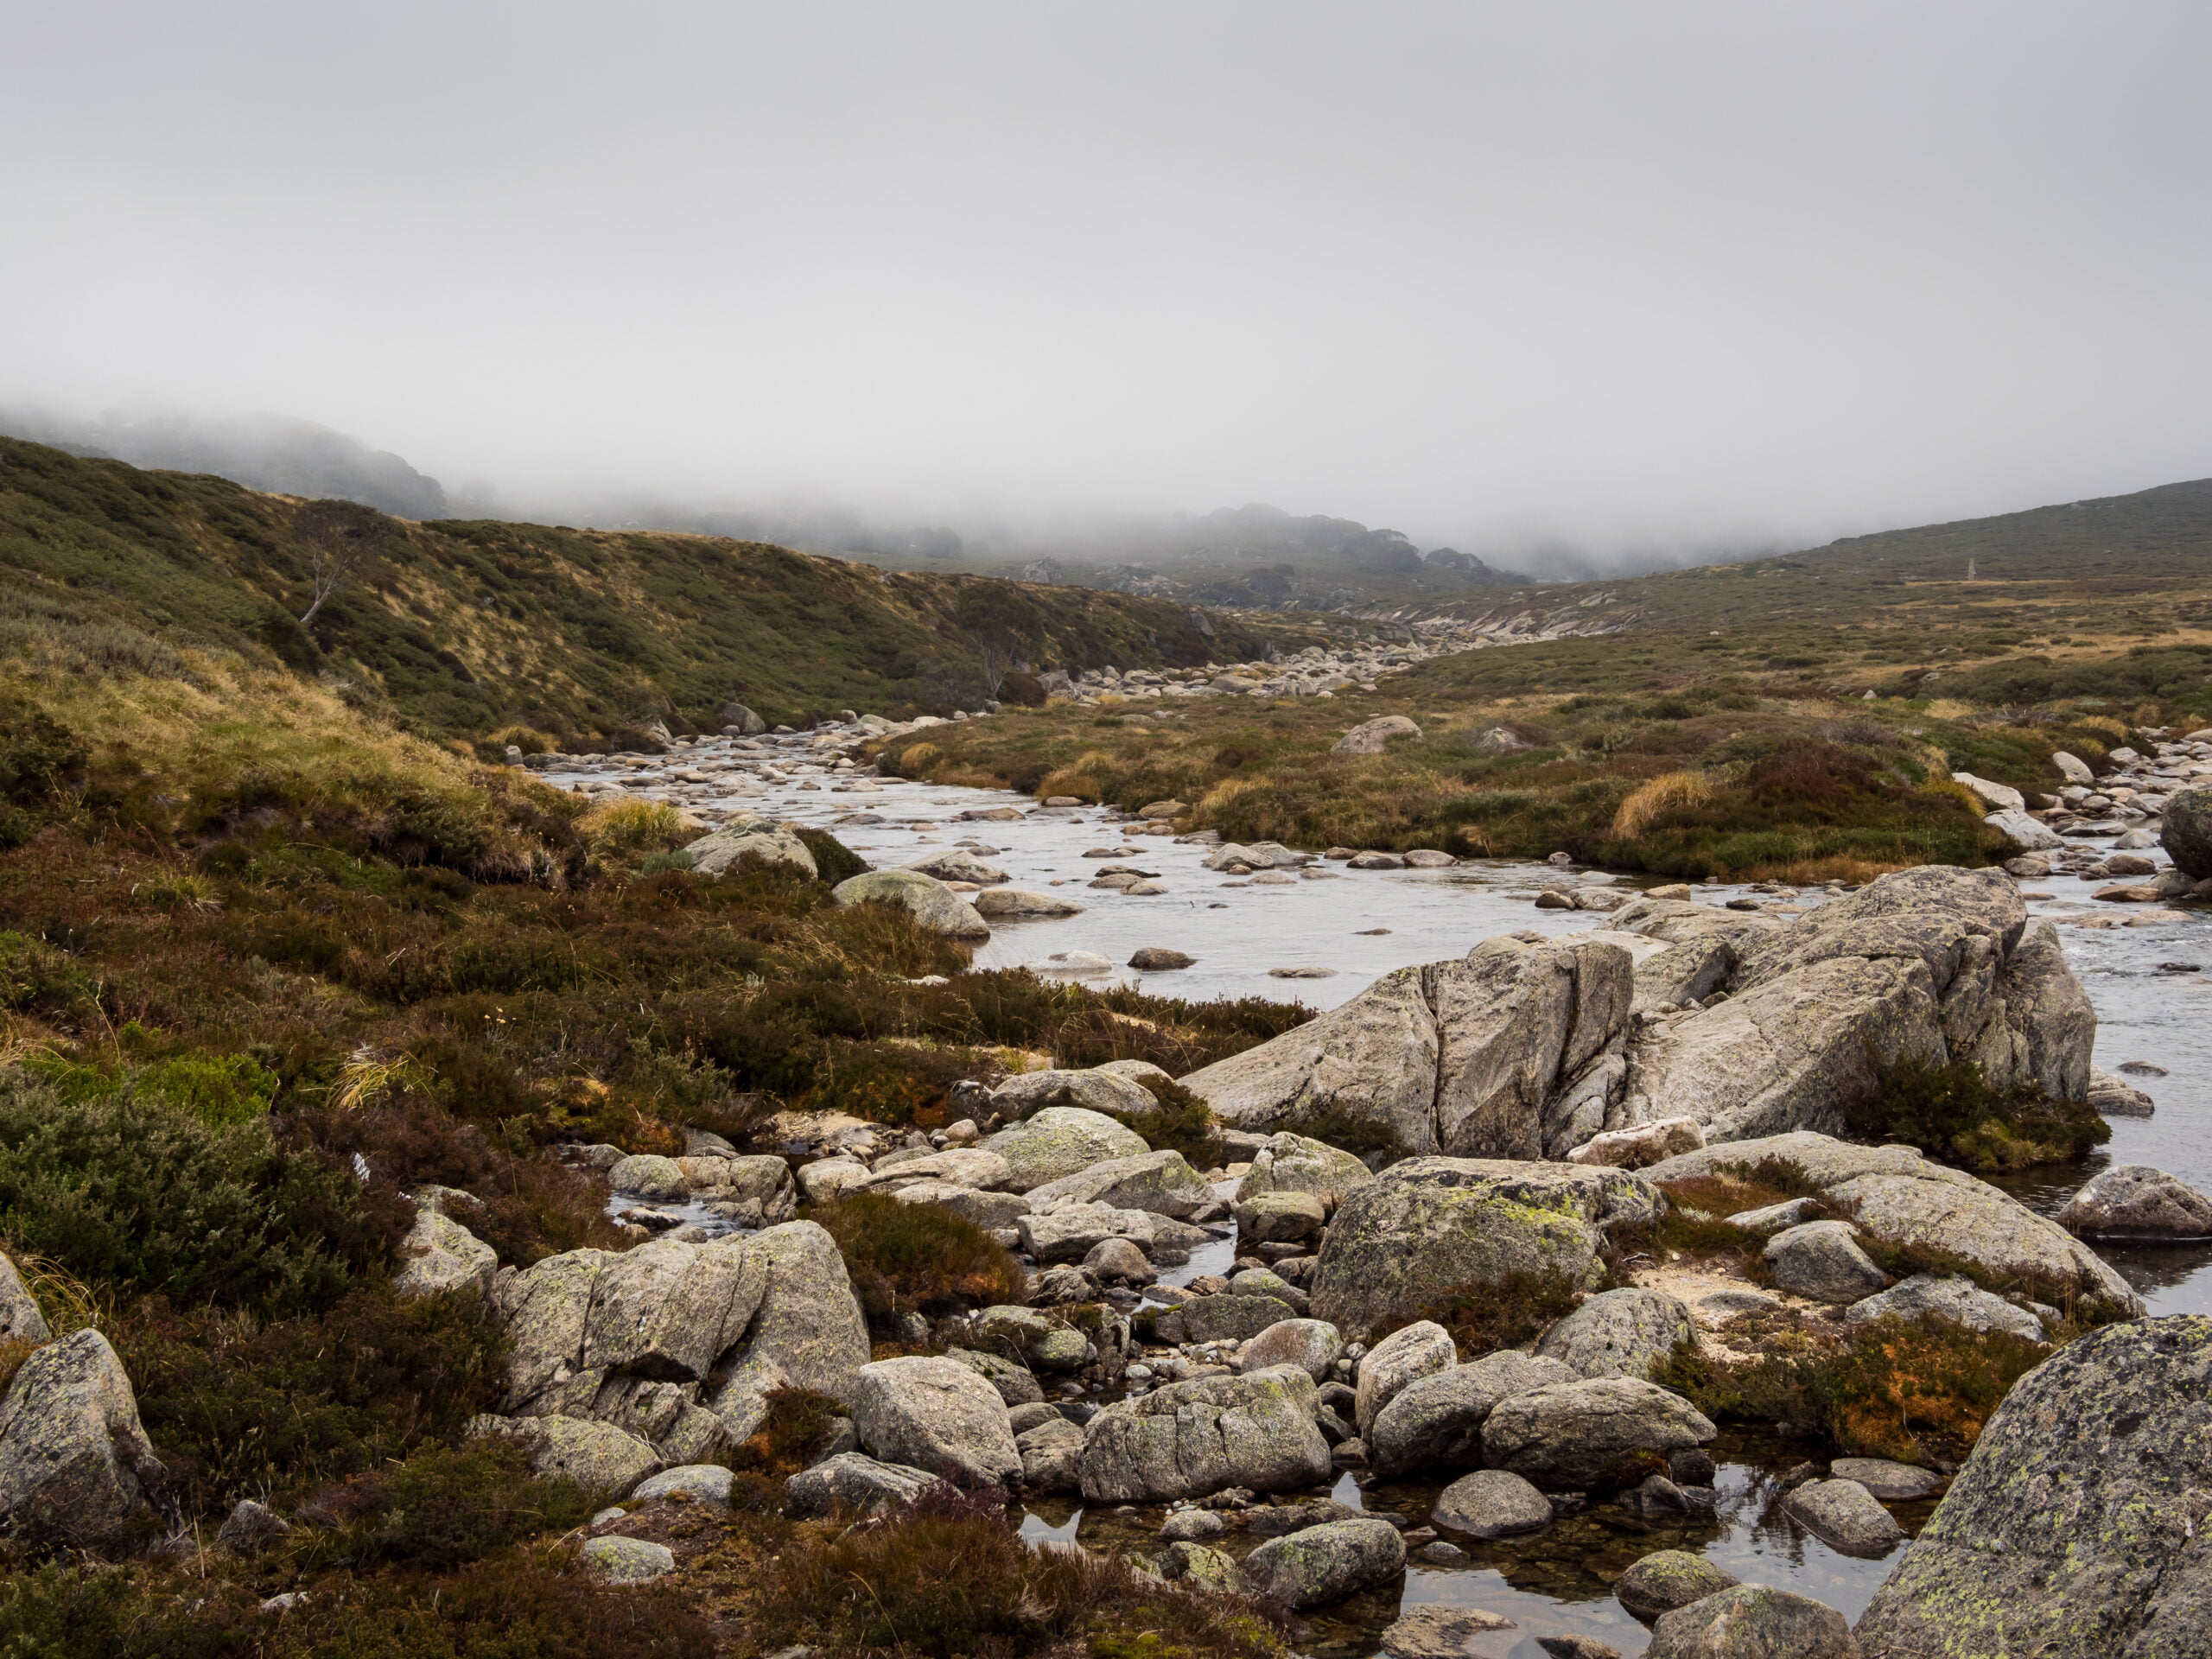 A moody photograph of the Snowy River on a misty morning.